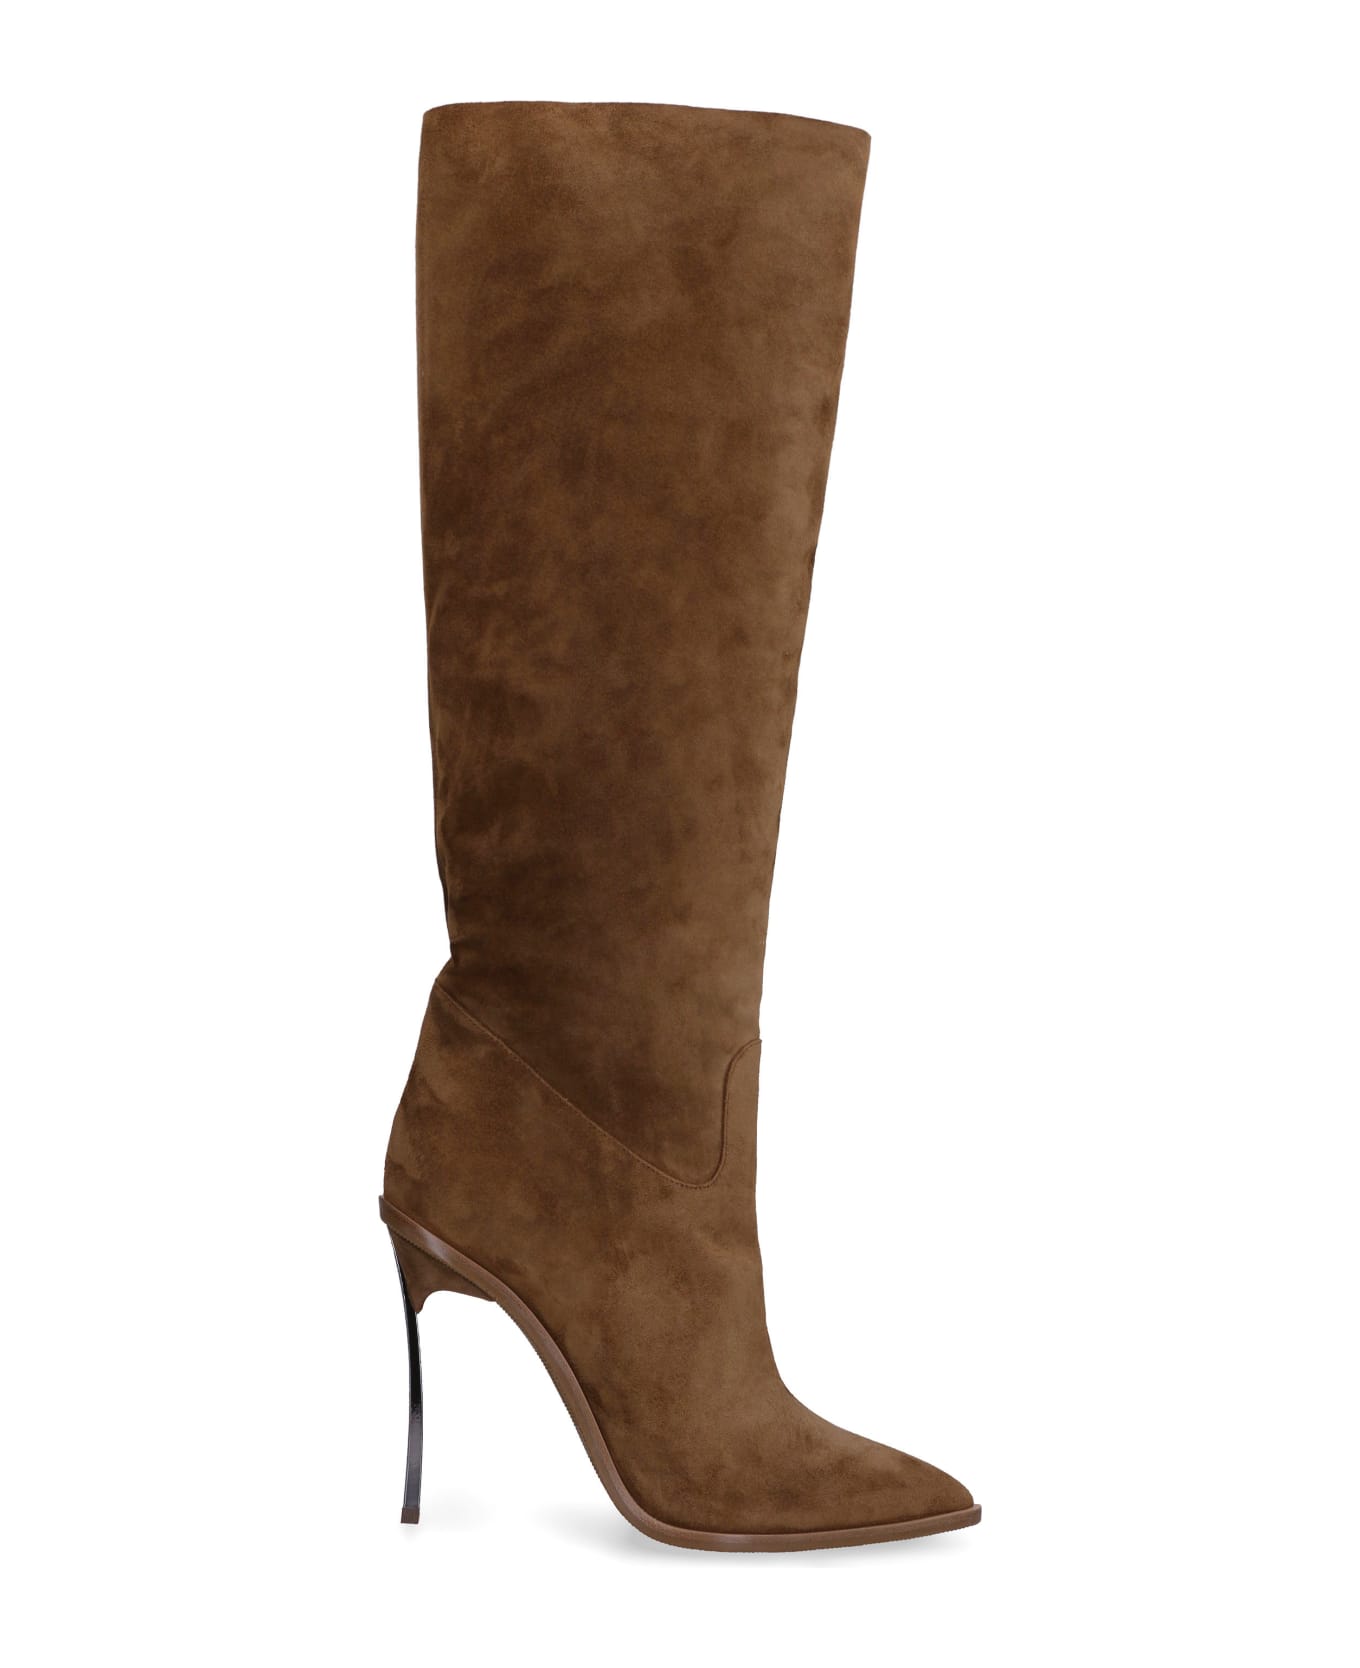 Casadei Suede Knee High Boots - brown ブーツ